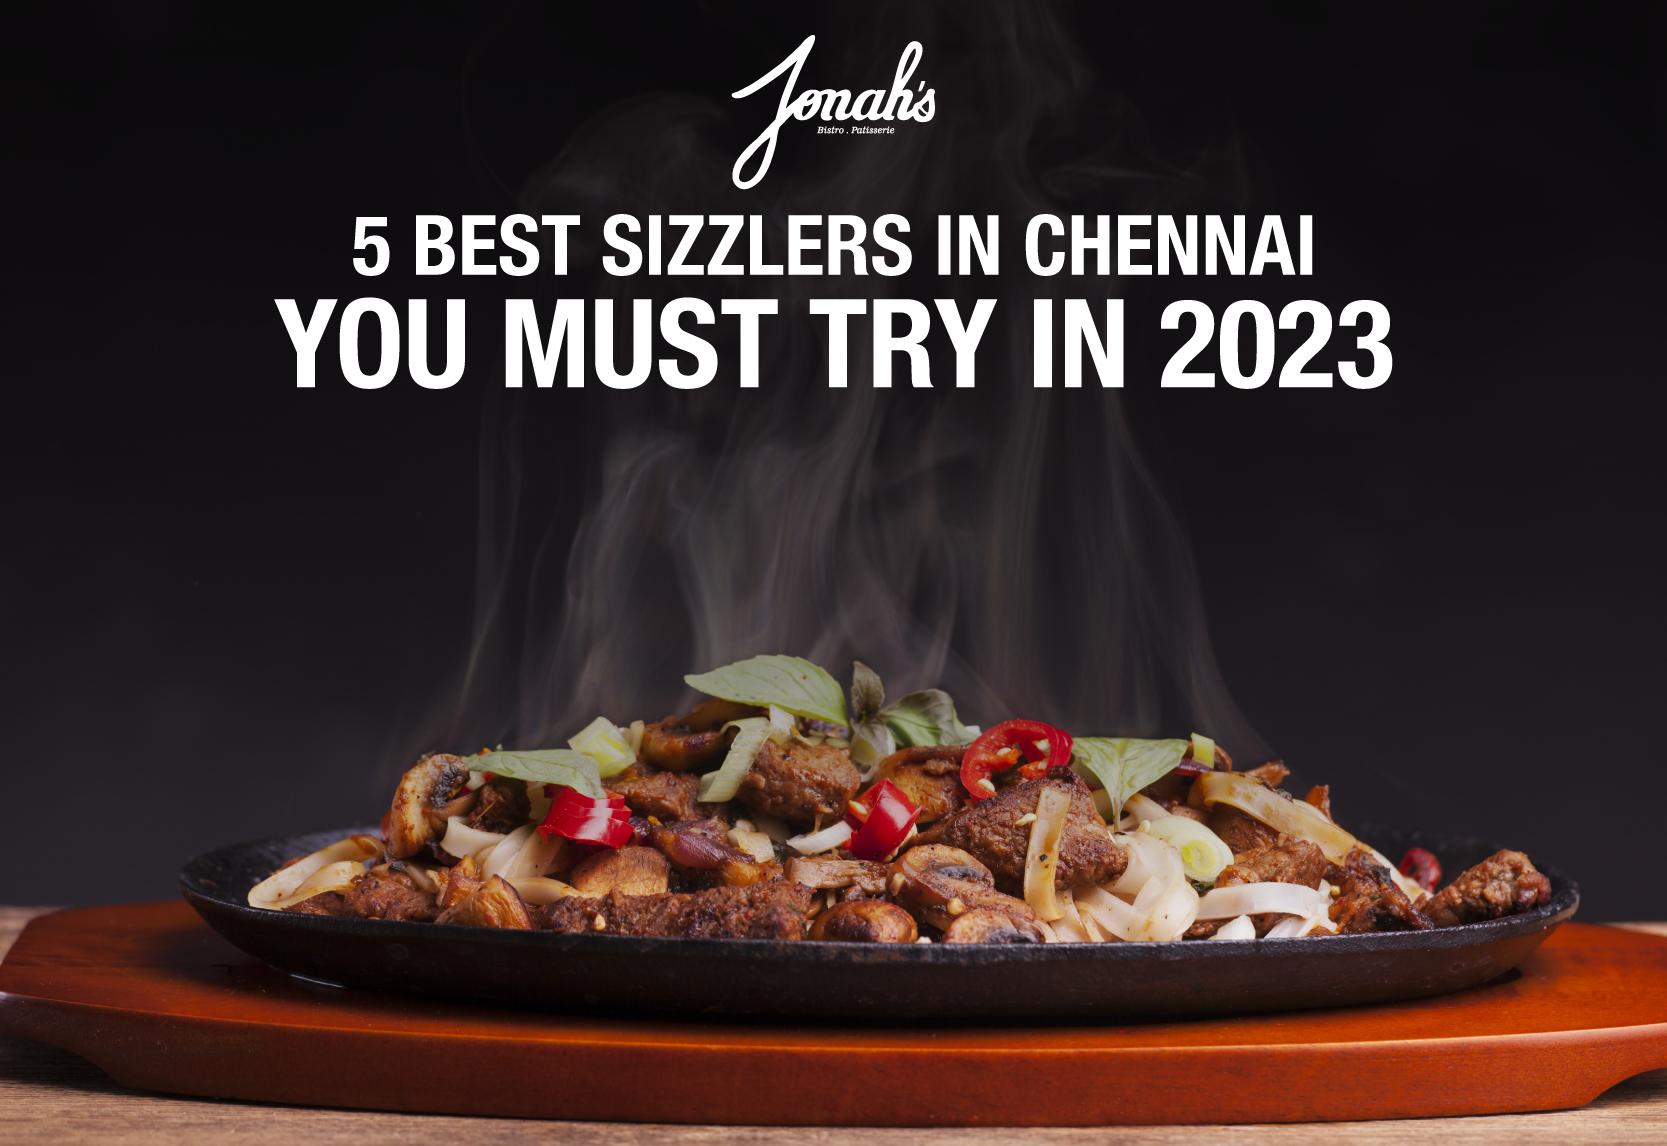 Types of sizzlers